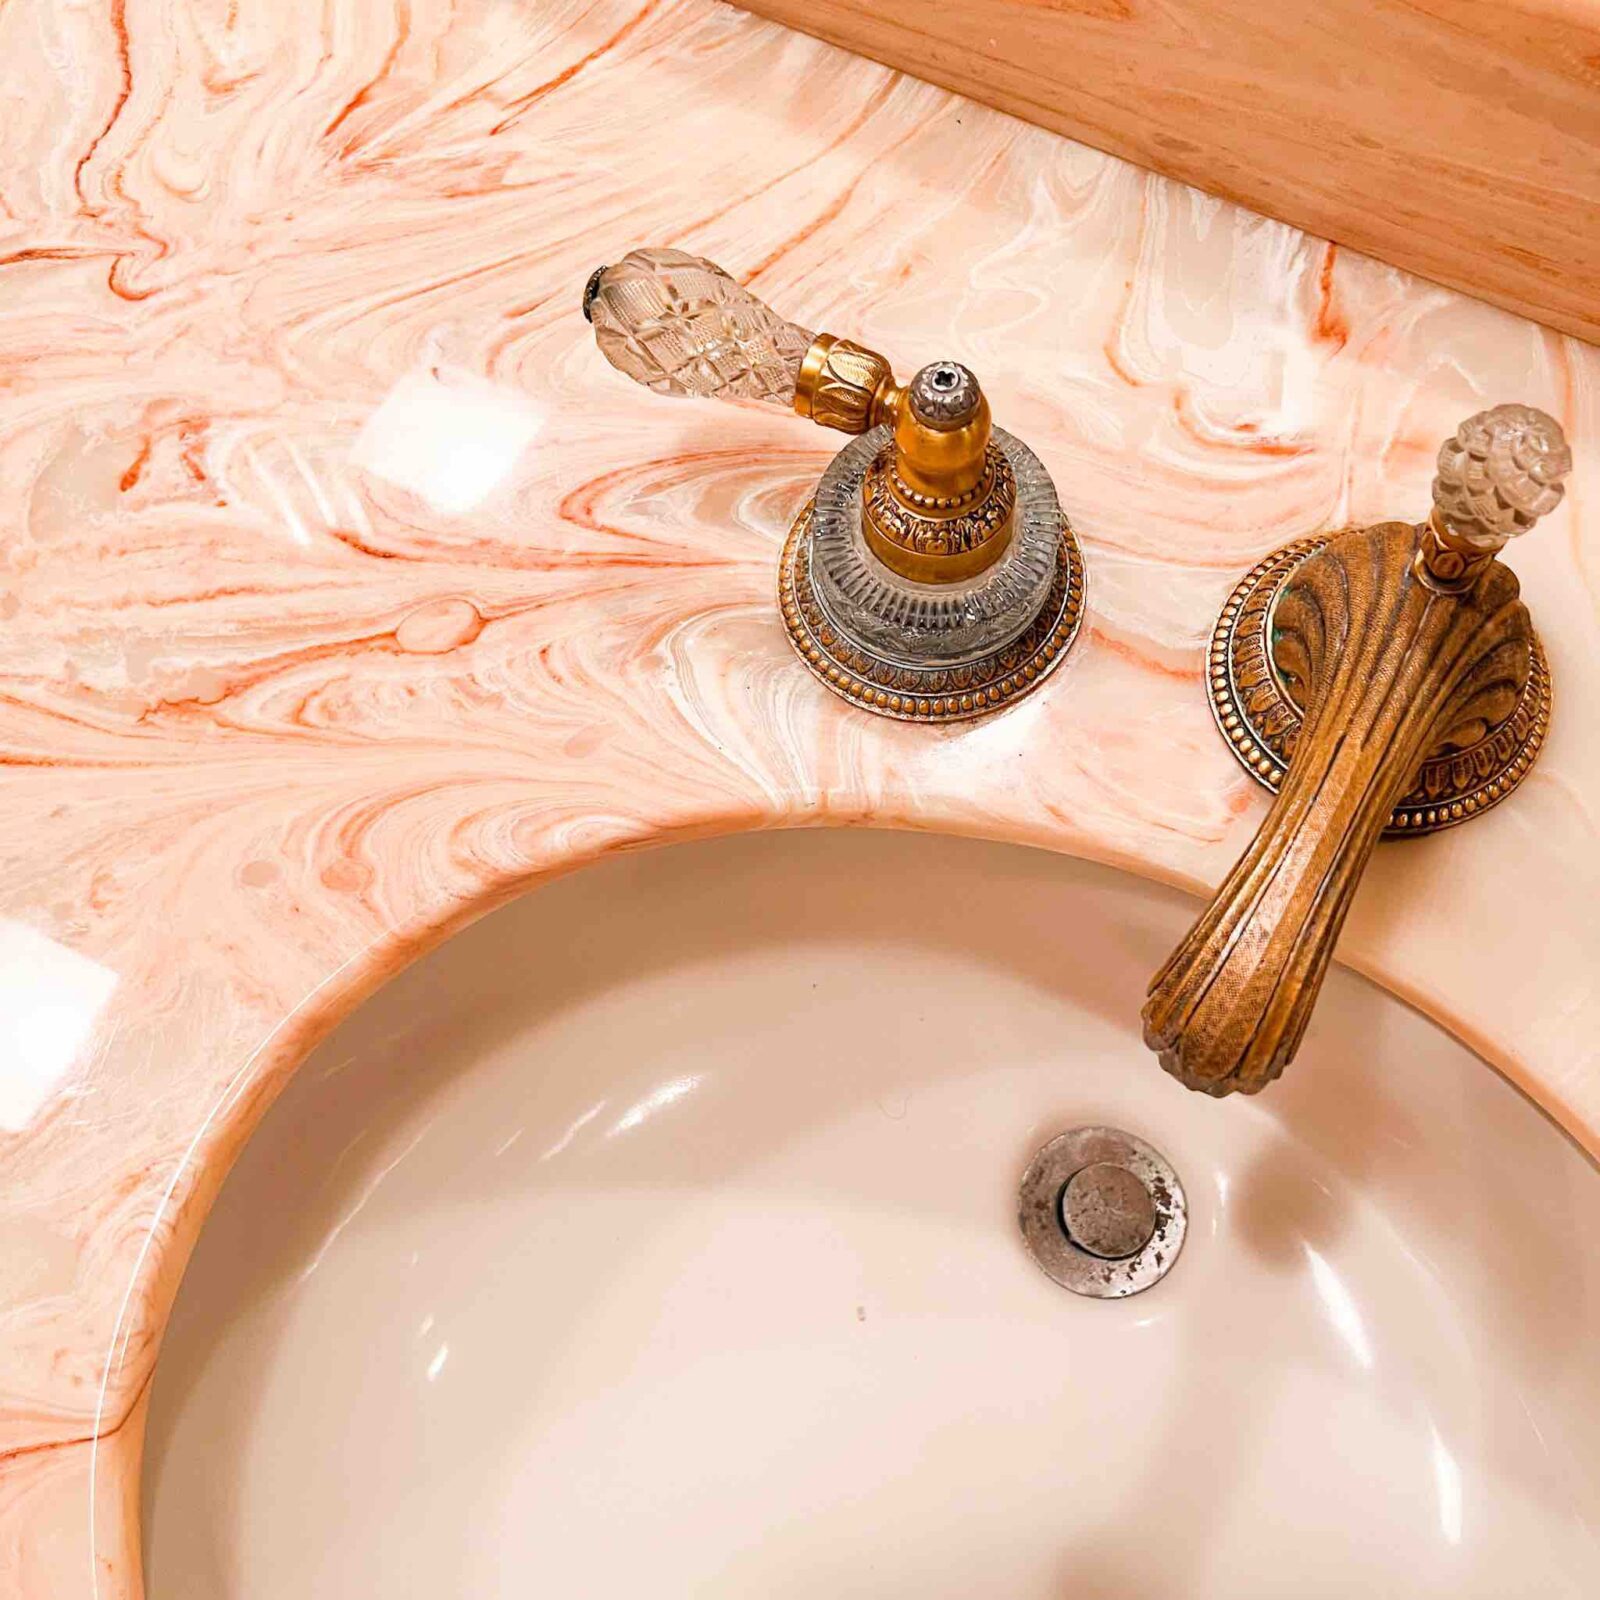 Pink marble bathroom countertop and sink